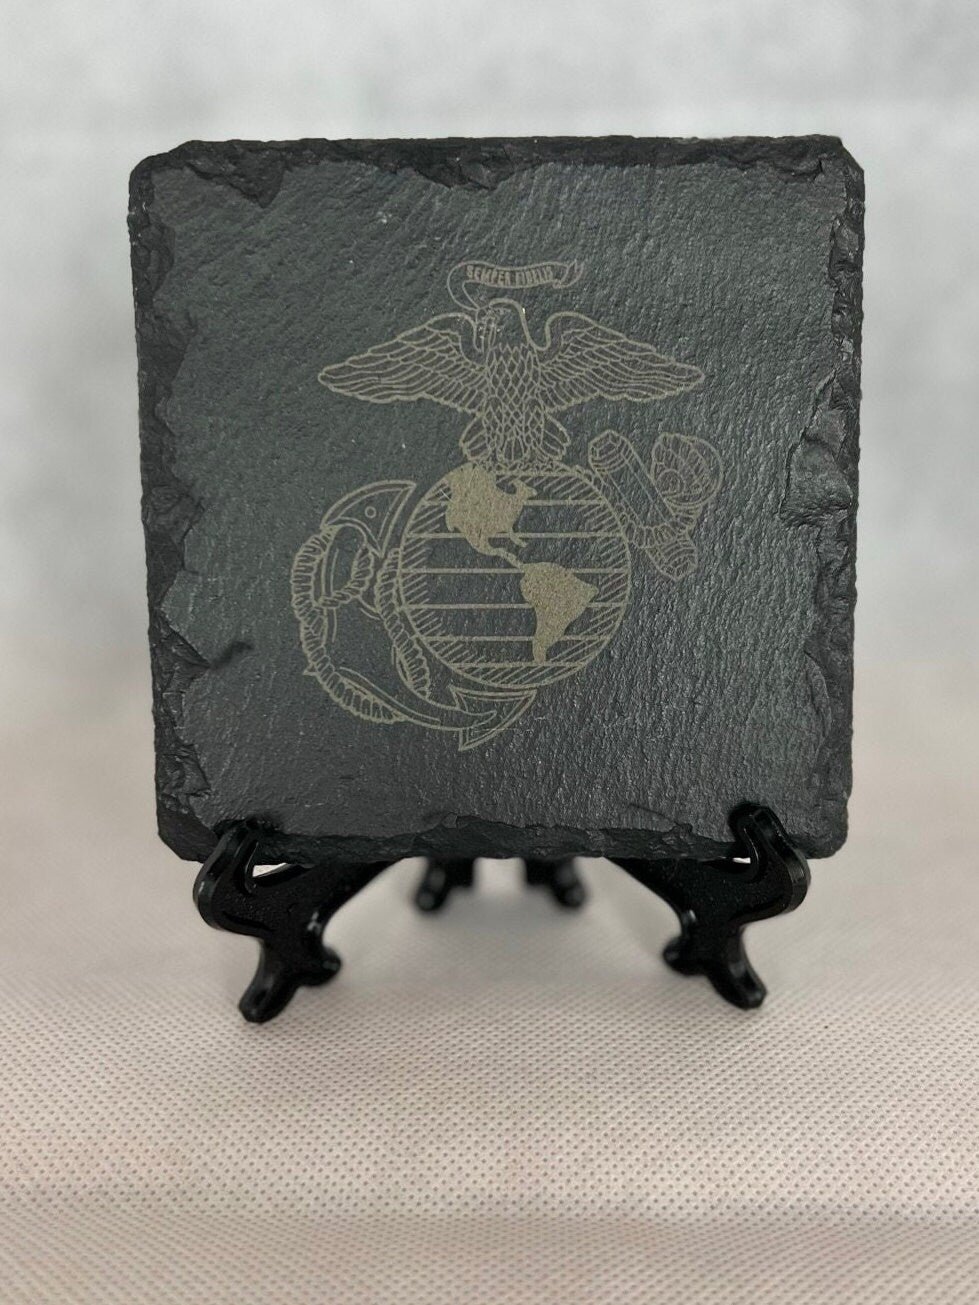 Laser Engraved Slate Coaster with the United State Marines Logo